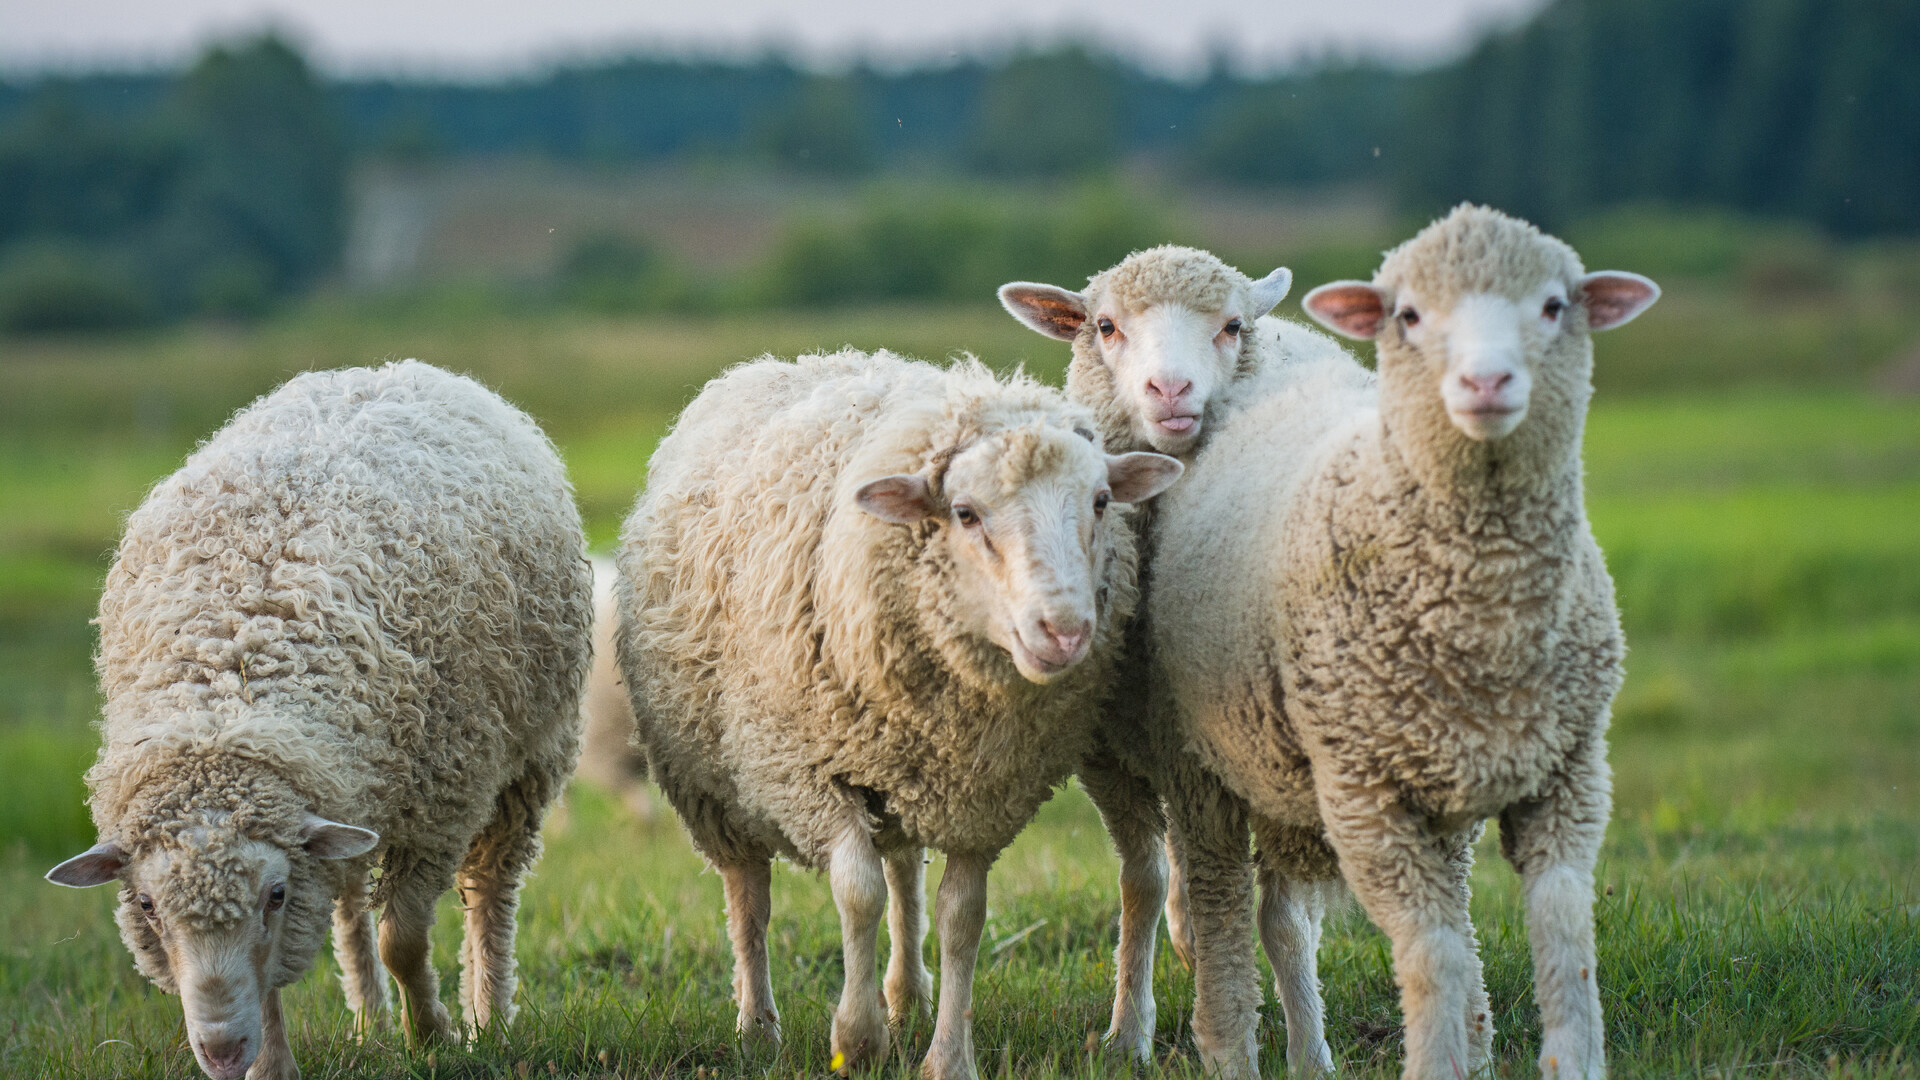 Testing of New Technology for Sheep Ear Tag Identification